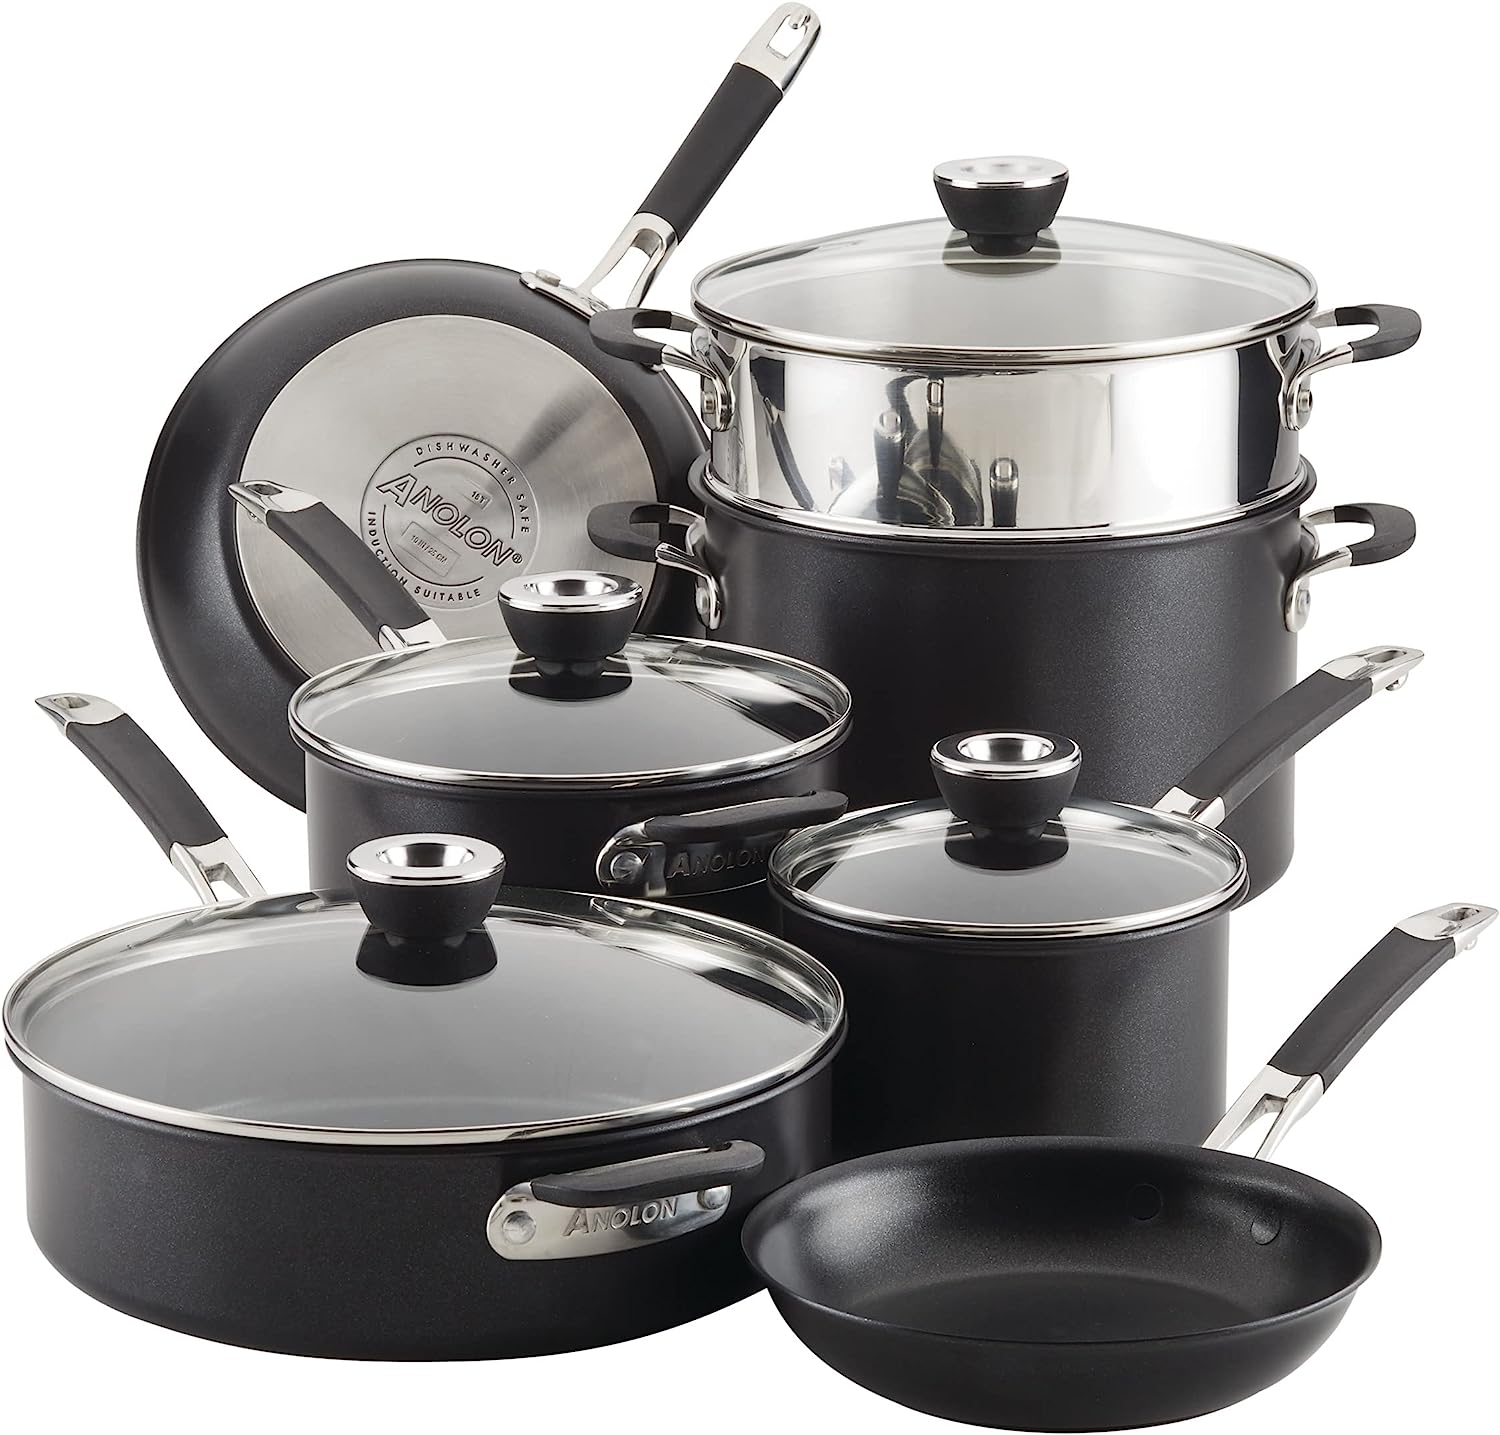 Anolon Smart Stack Hard Anodized Nonstick Cookware